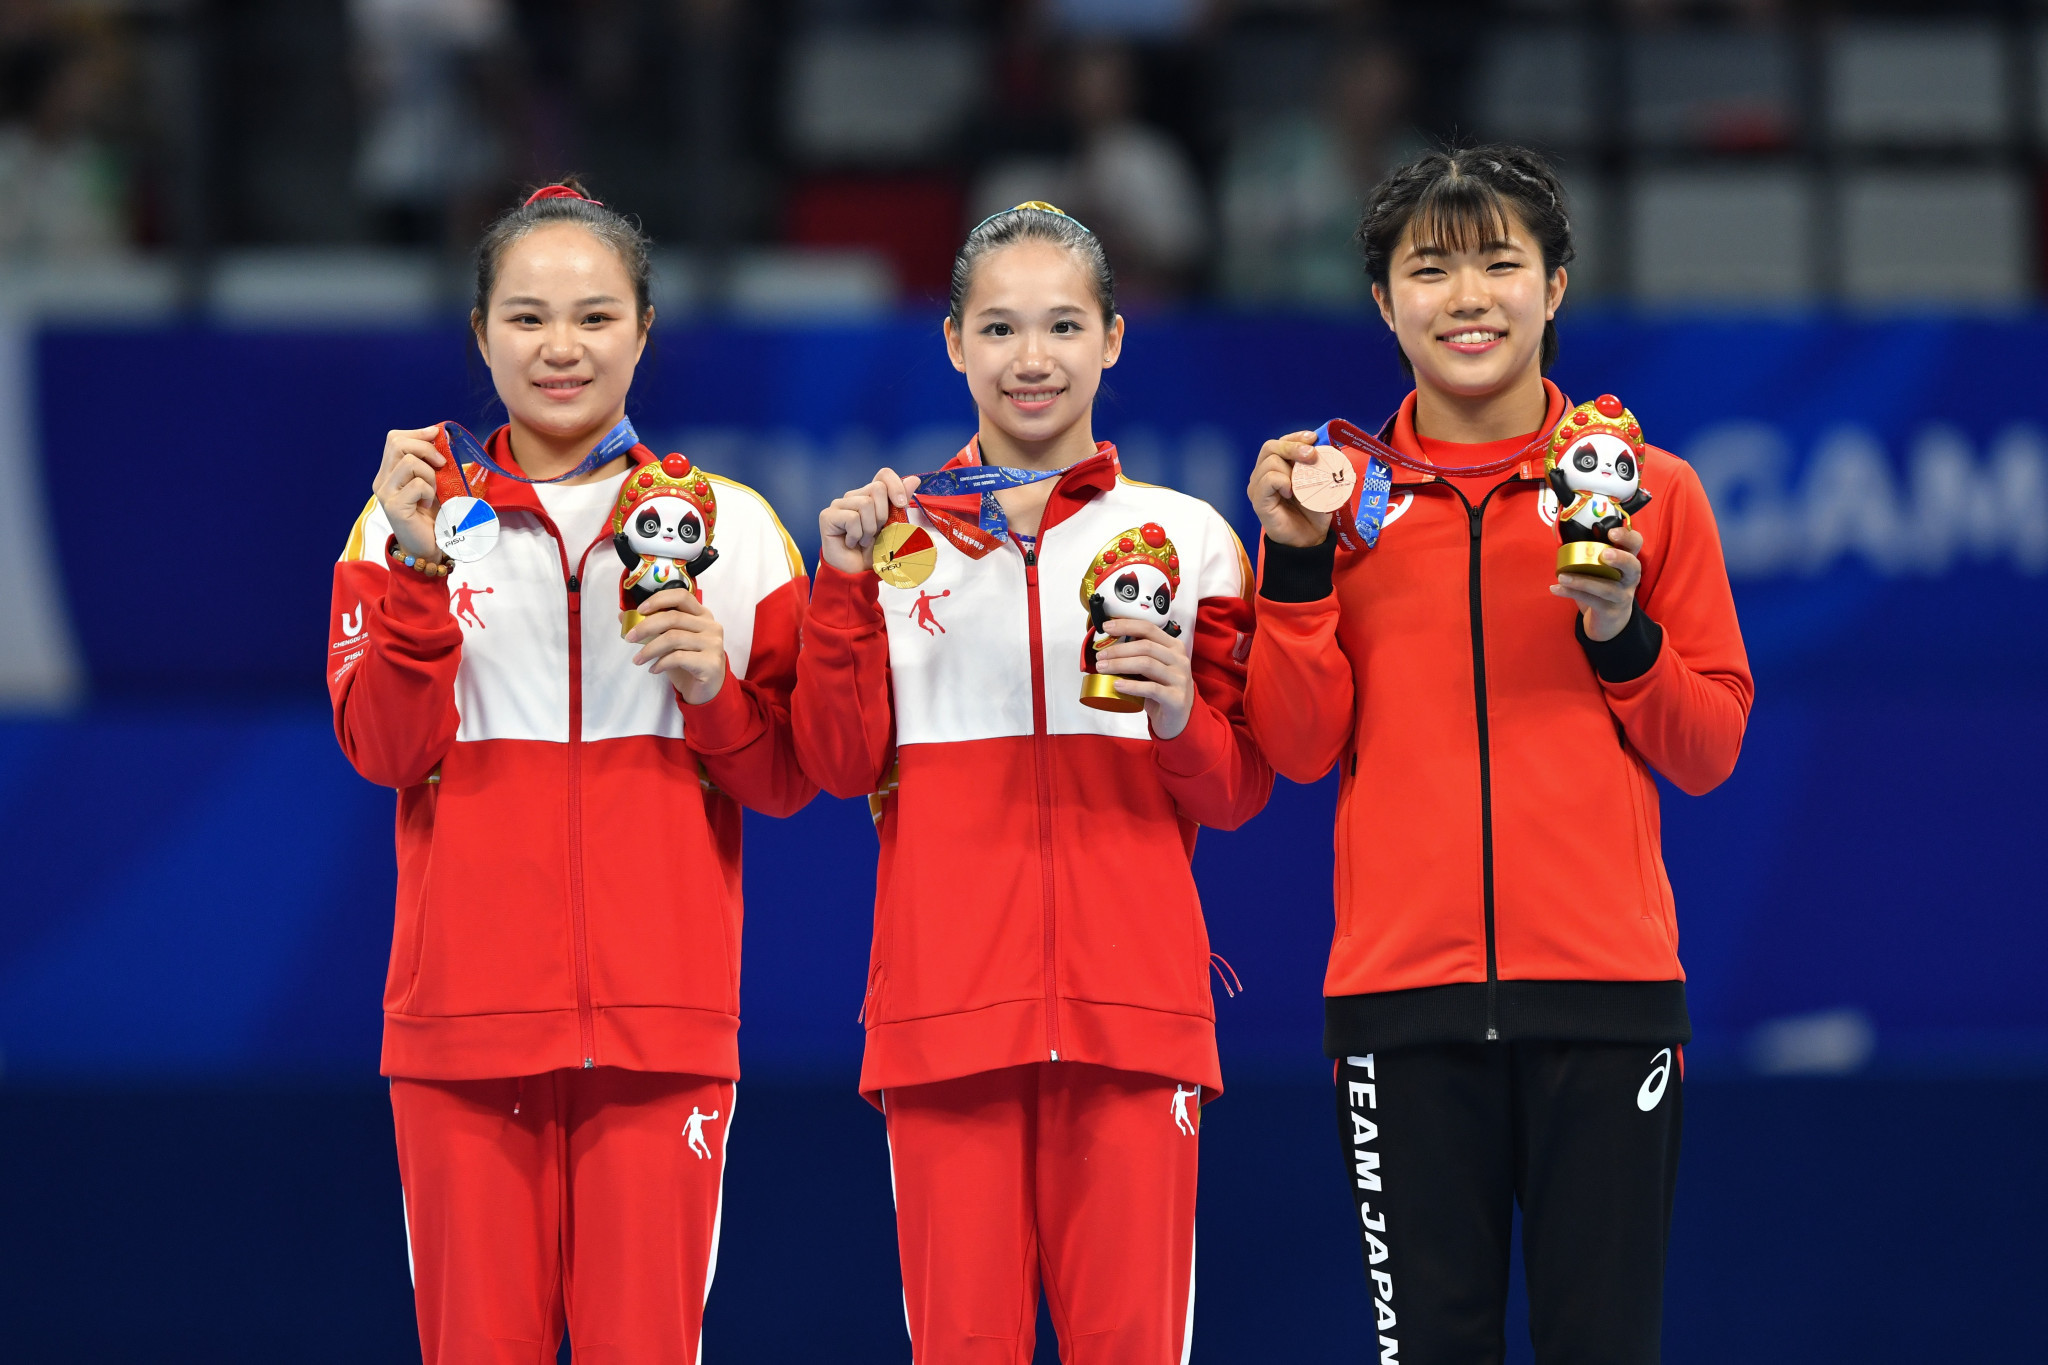 Ou increases gold medal tally to four in stunning show at Chengdu 2021